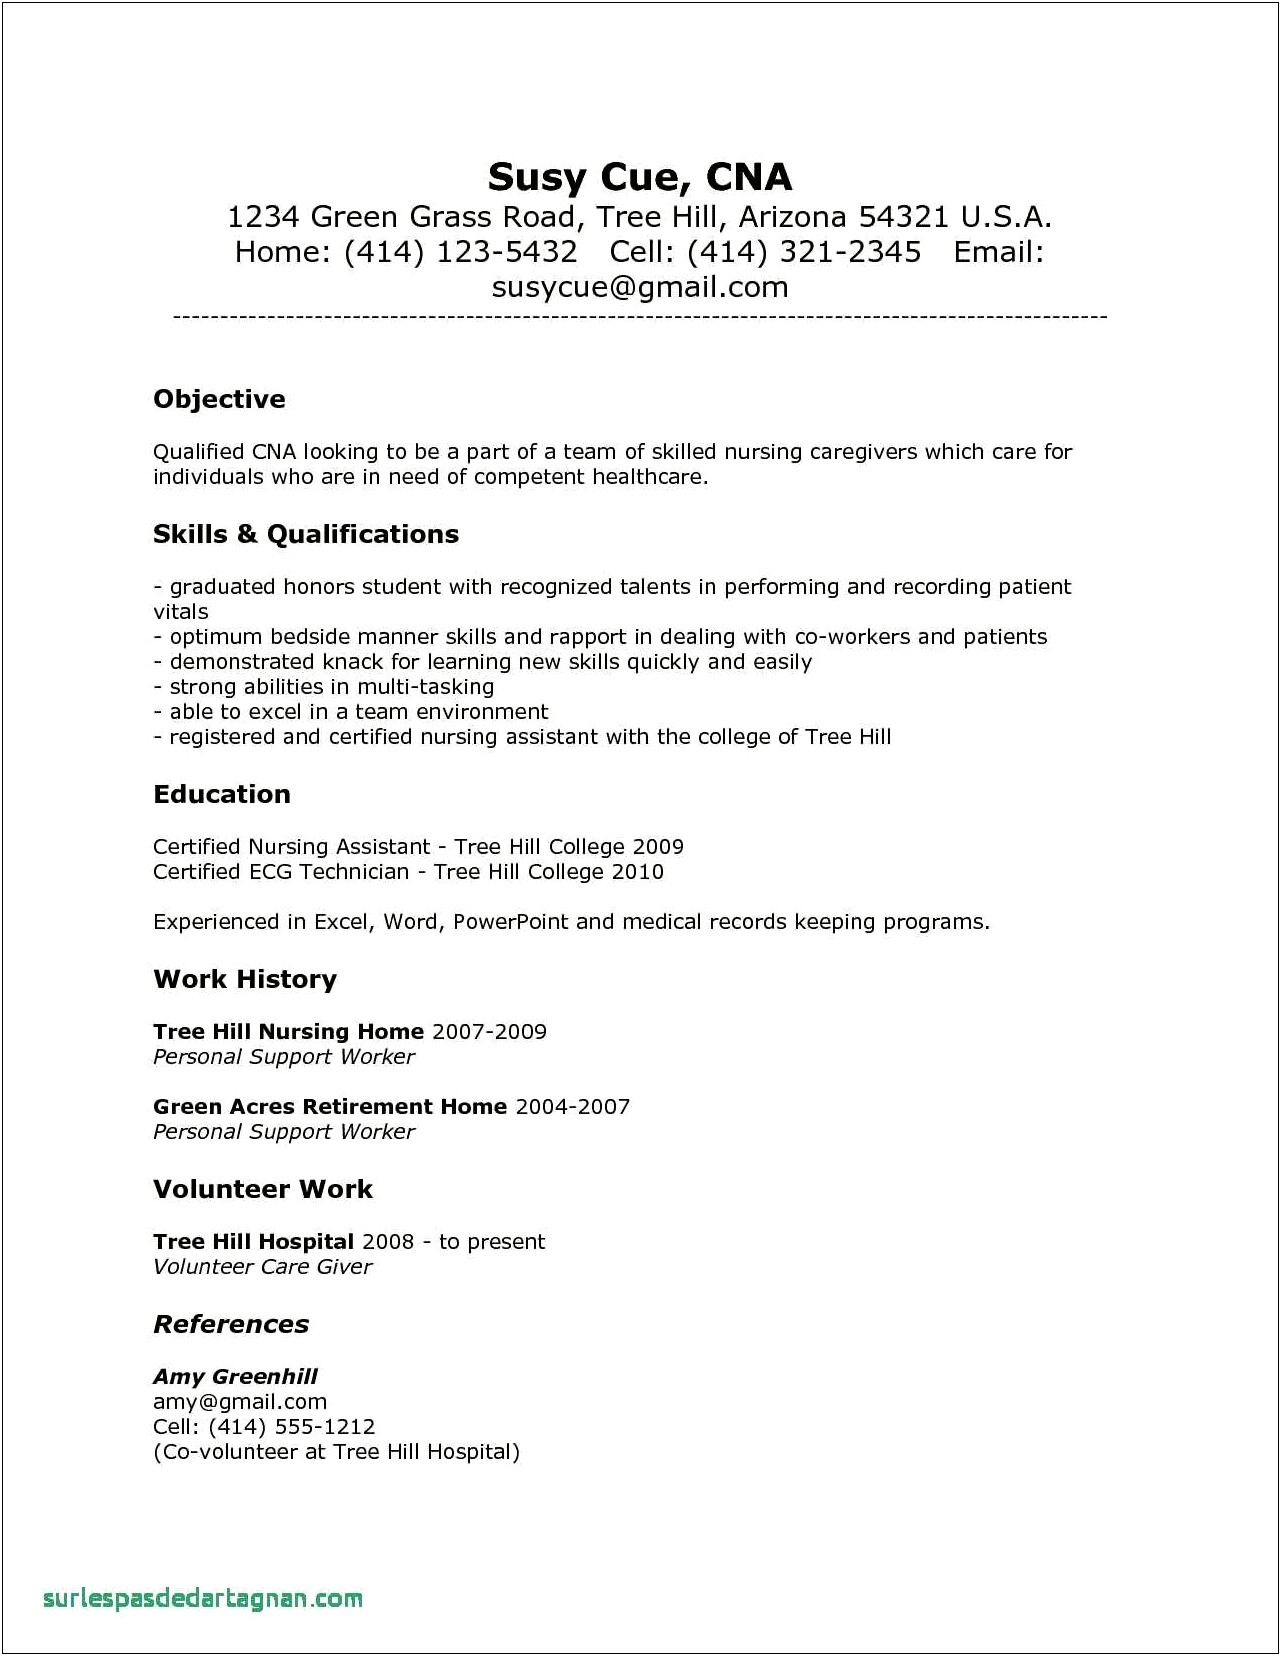 Sample Resume For Nurses Applicants In The Philippines